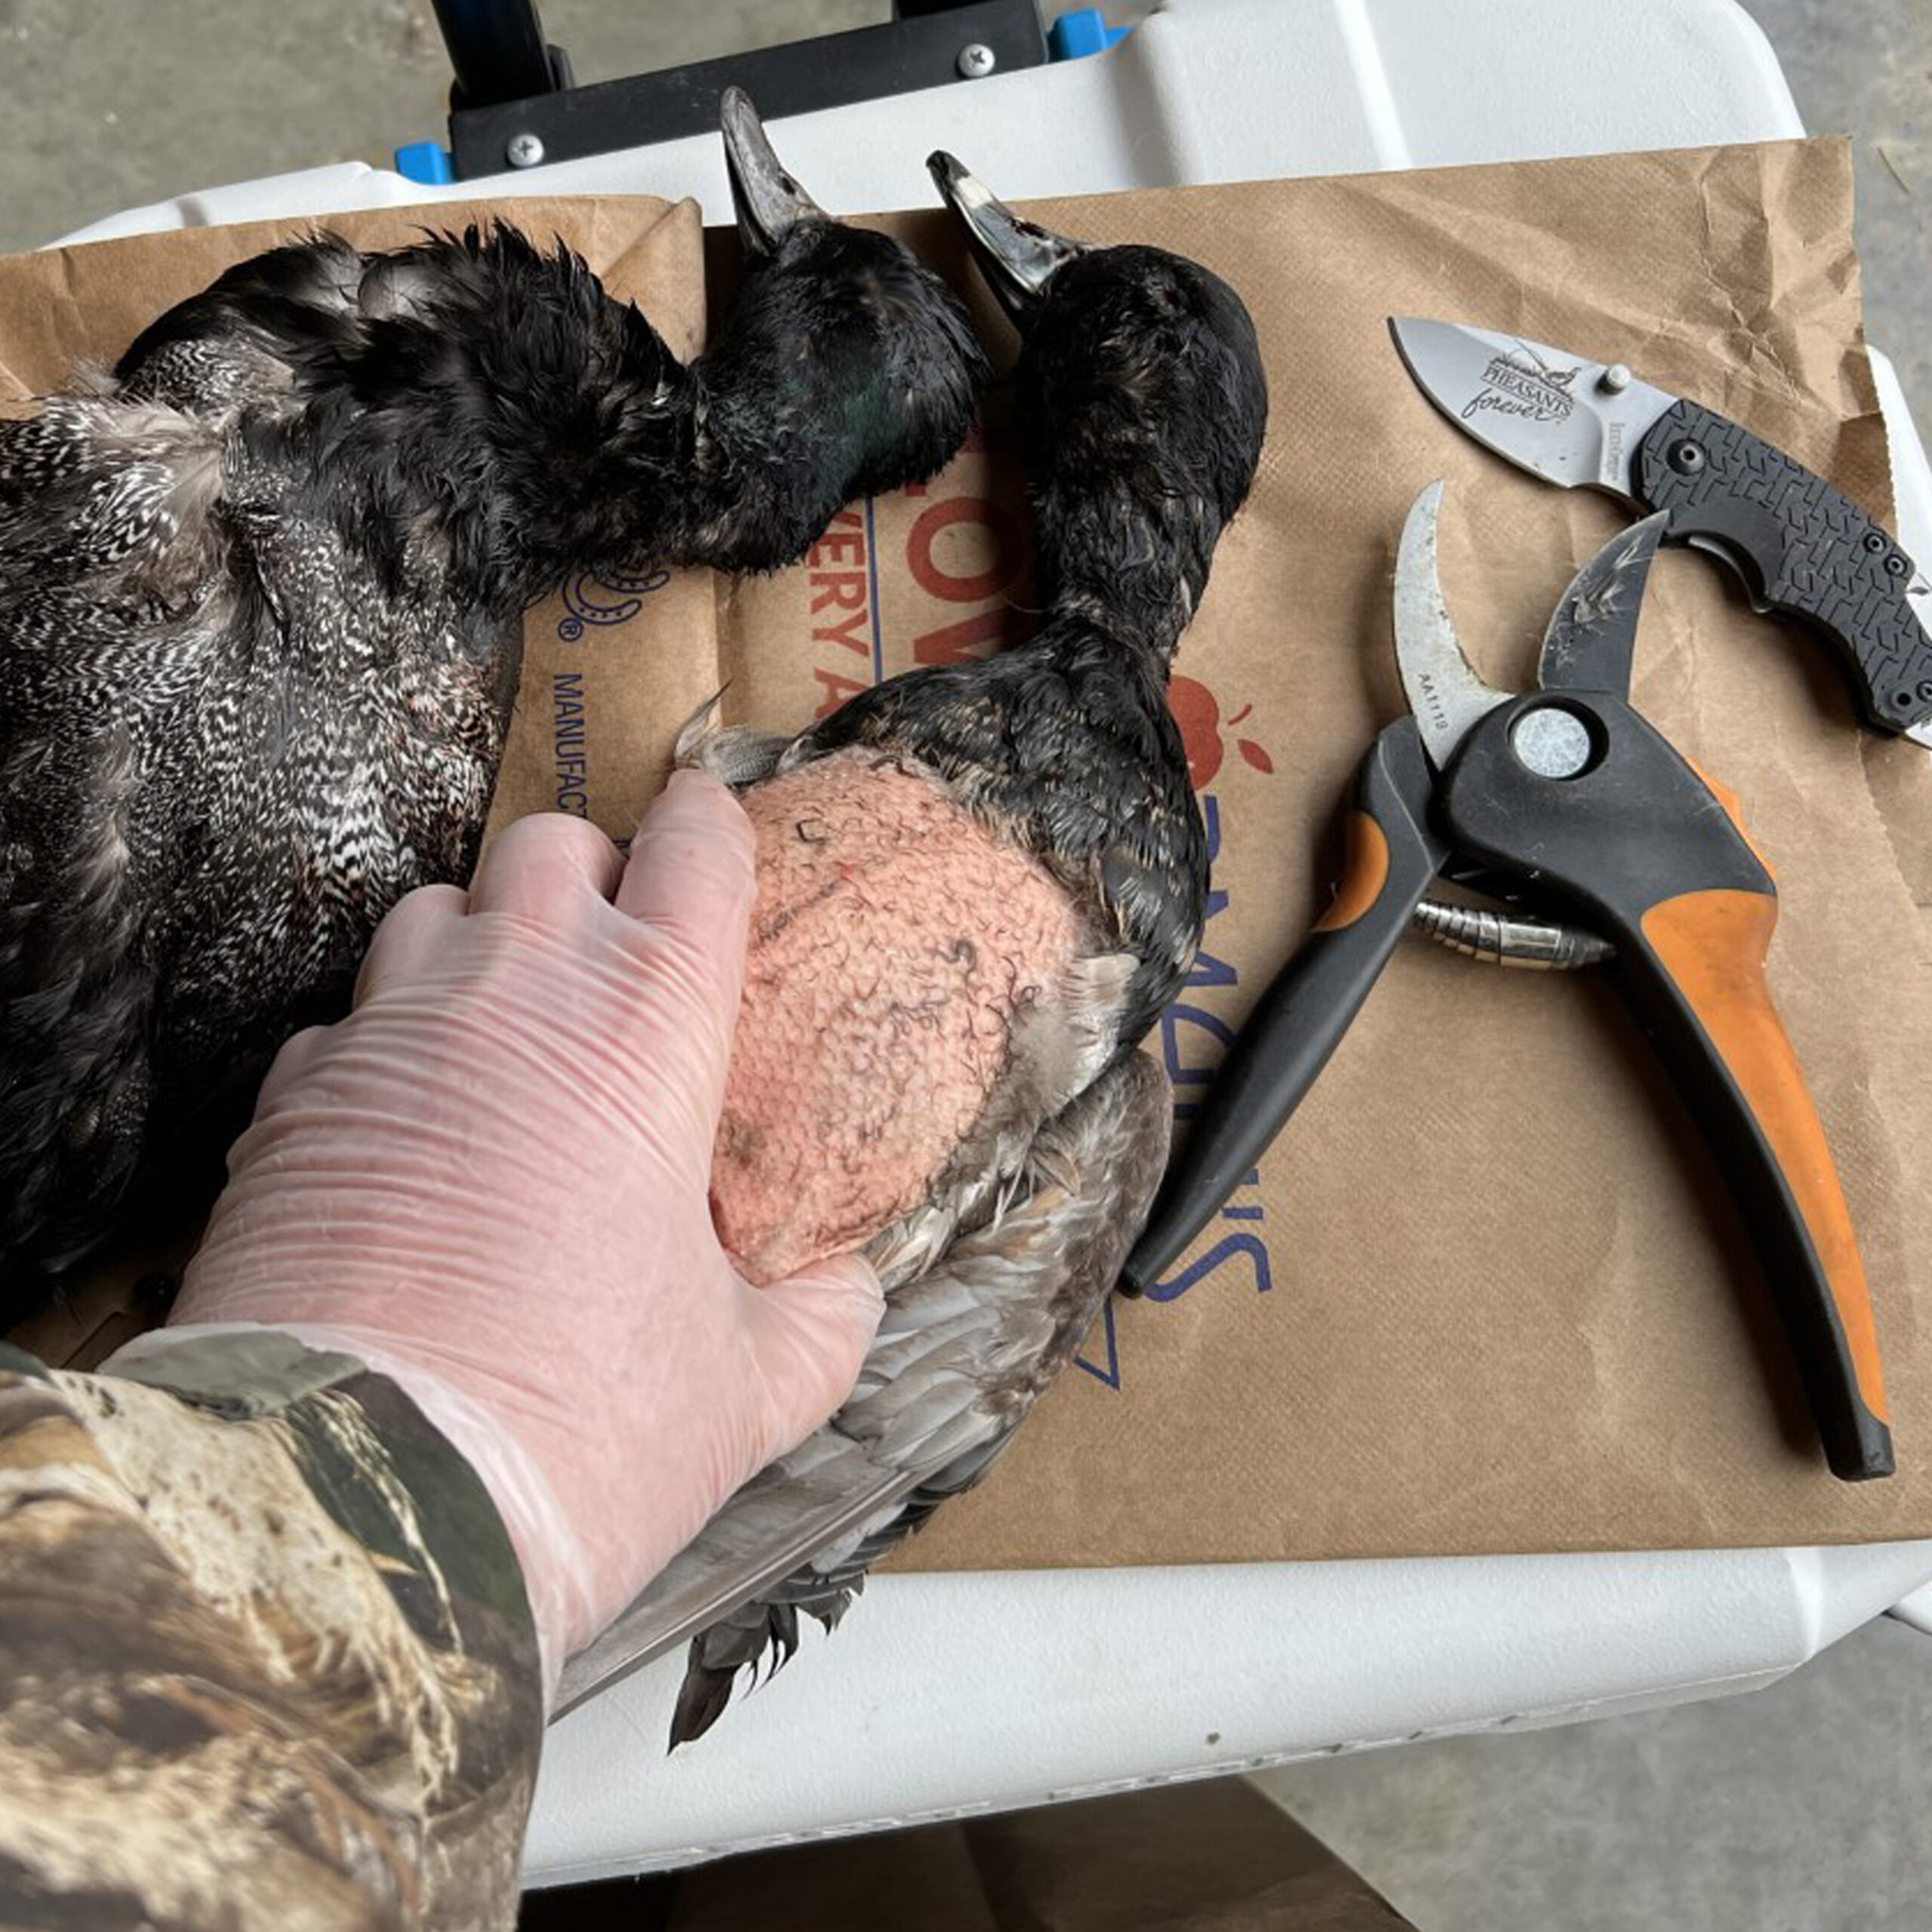 According to the U.S. Department of Agriculture Animal and Plant Health Inspection Service, HPAI has been confirmed in 4,238 wild birds in the United States. Hunters cautioned to avoid contact with sick birds.